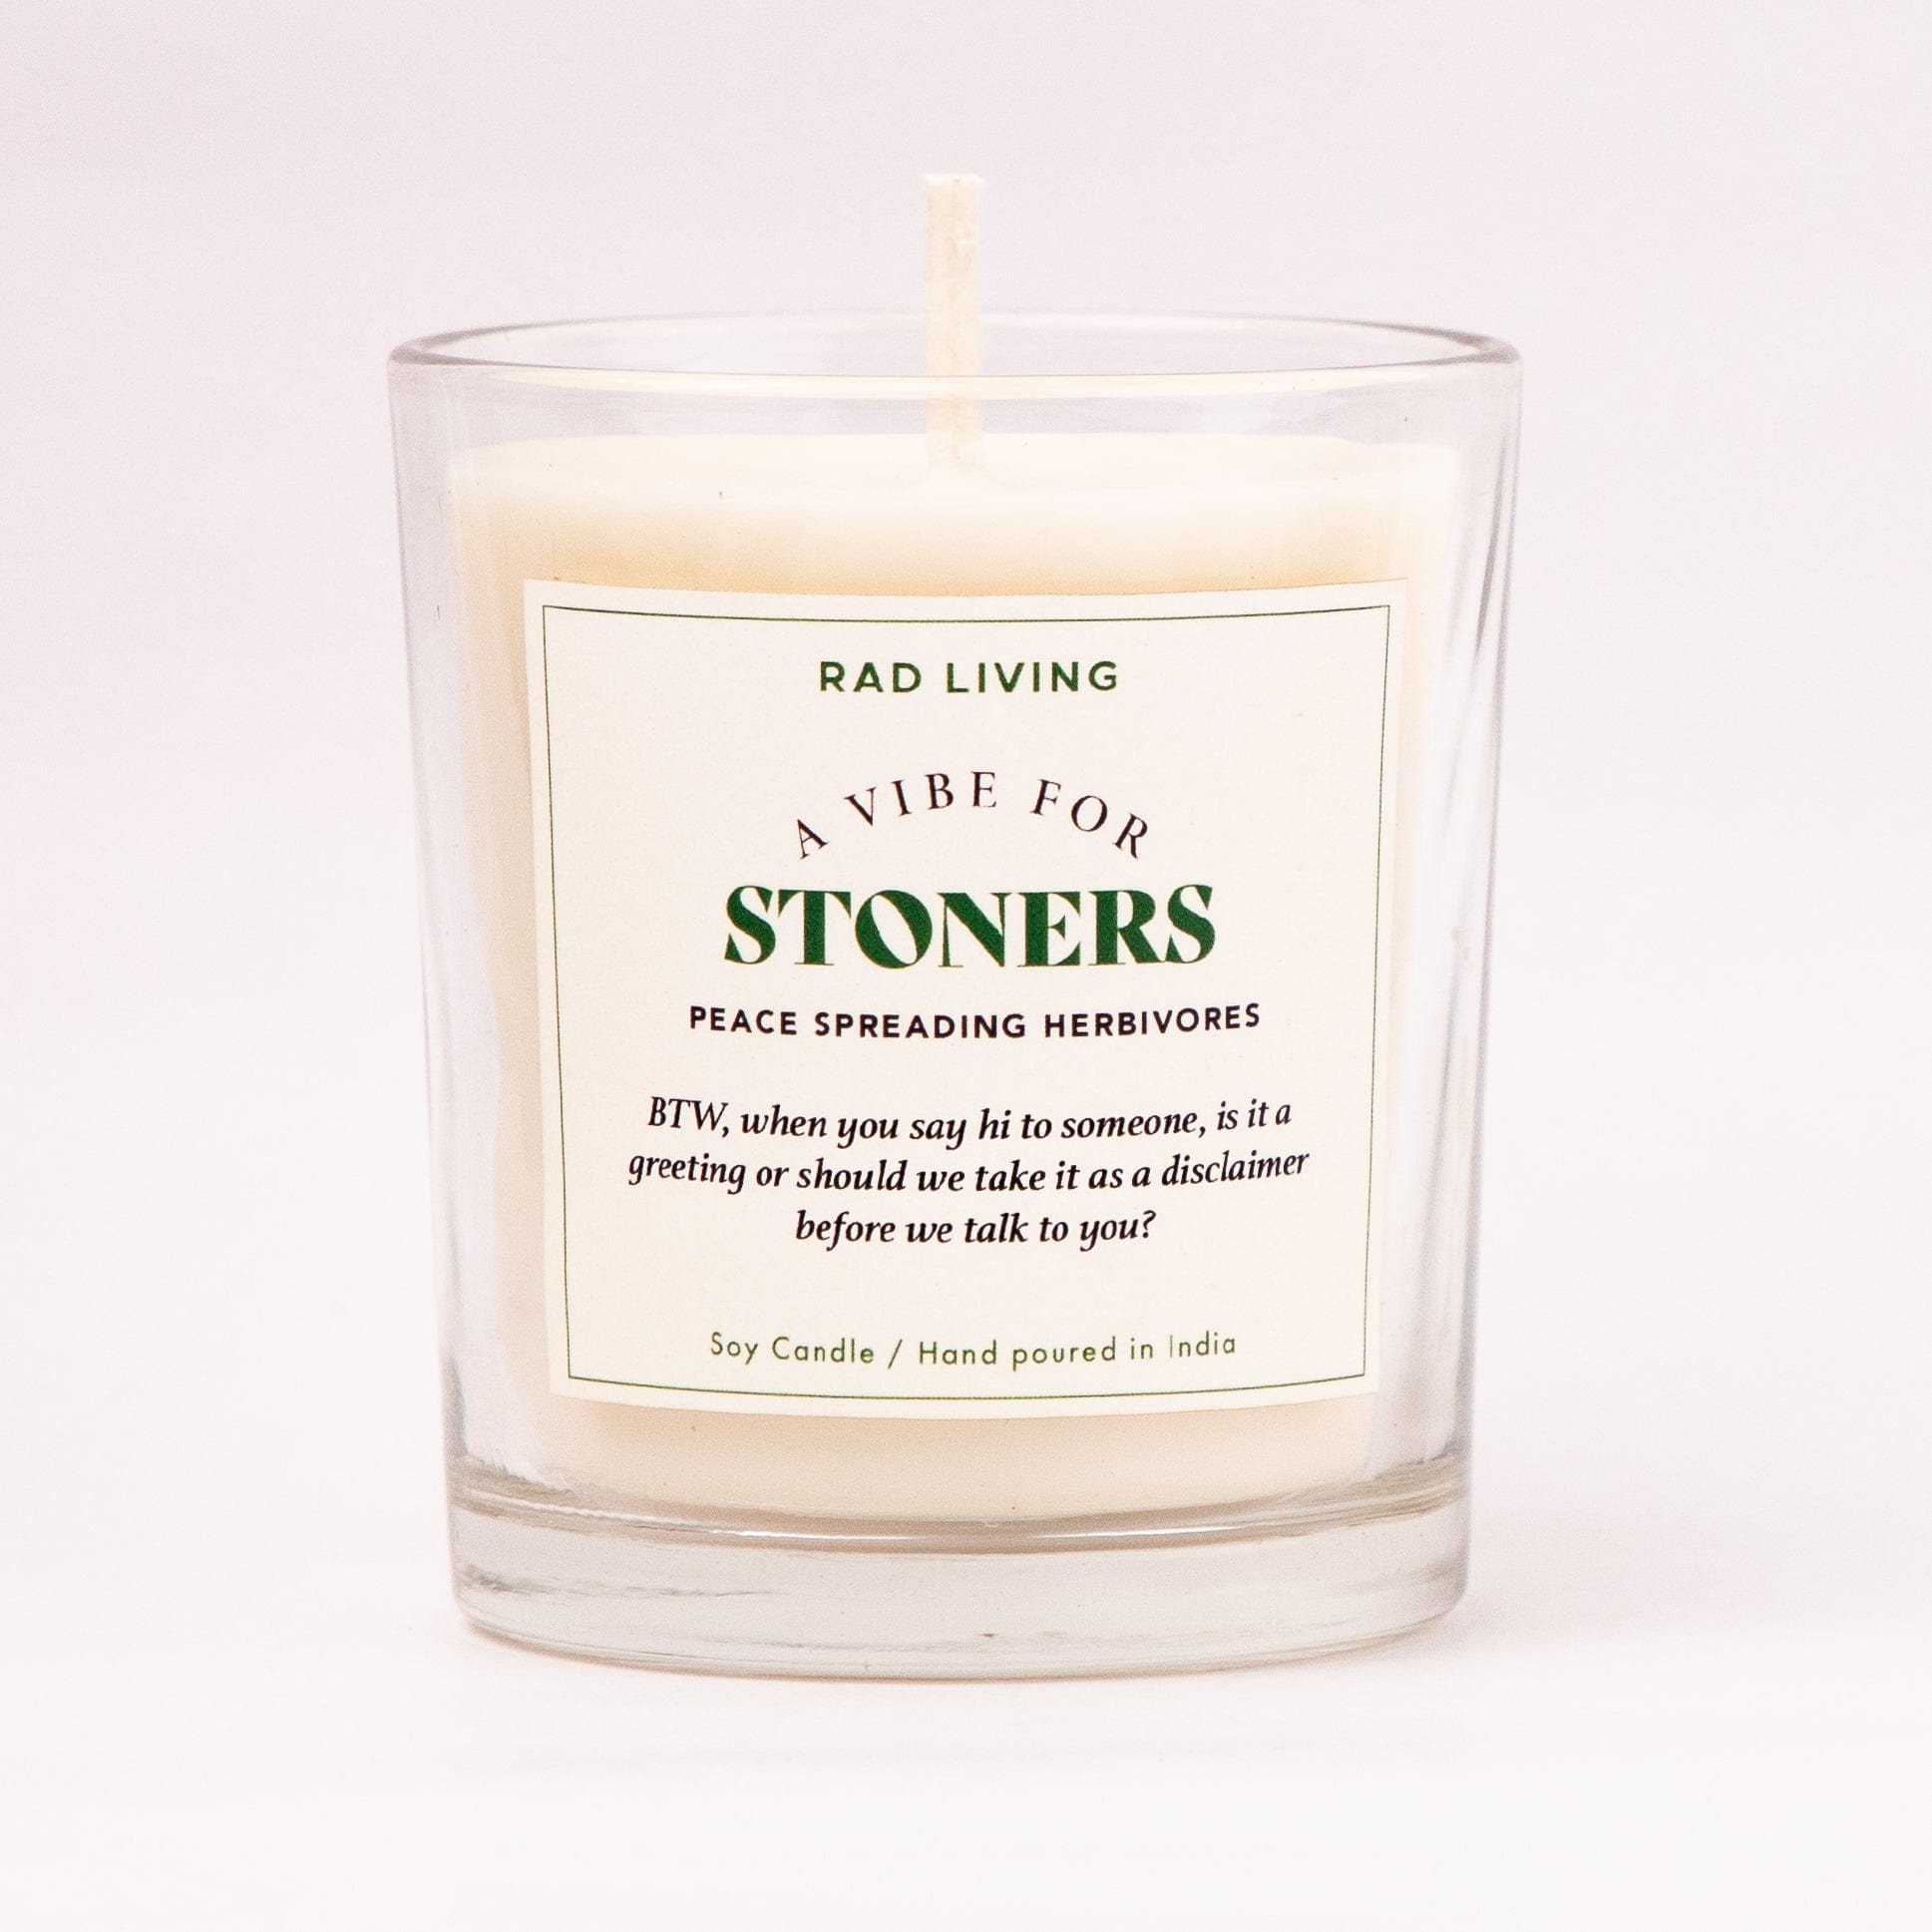 Stoners- Lush Green Scented